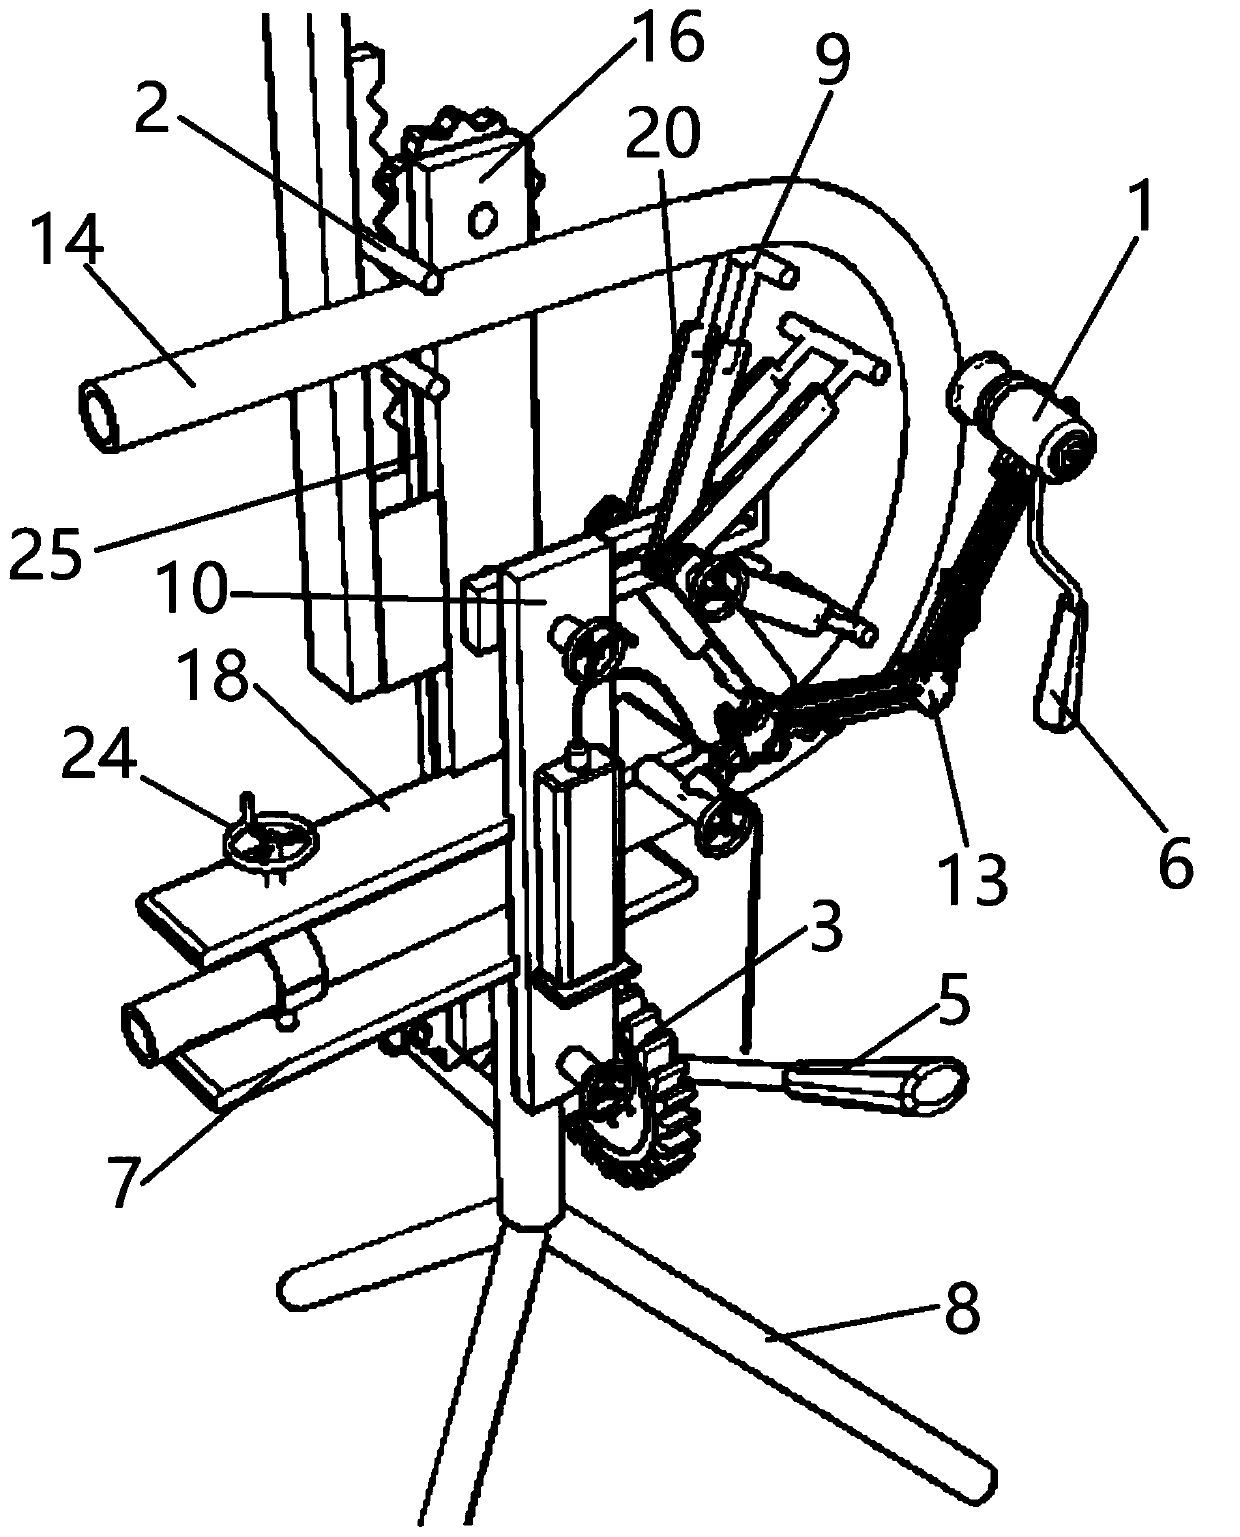 A device for assisting hot bending of bamboo